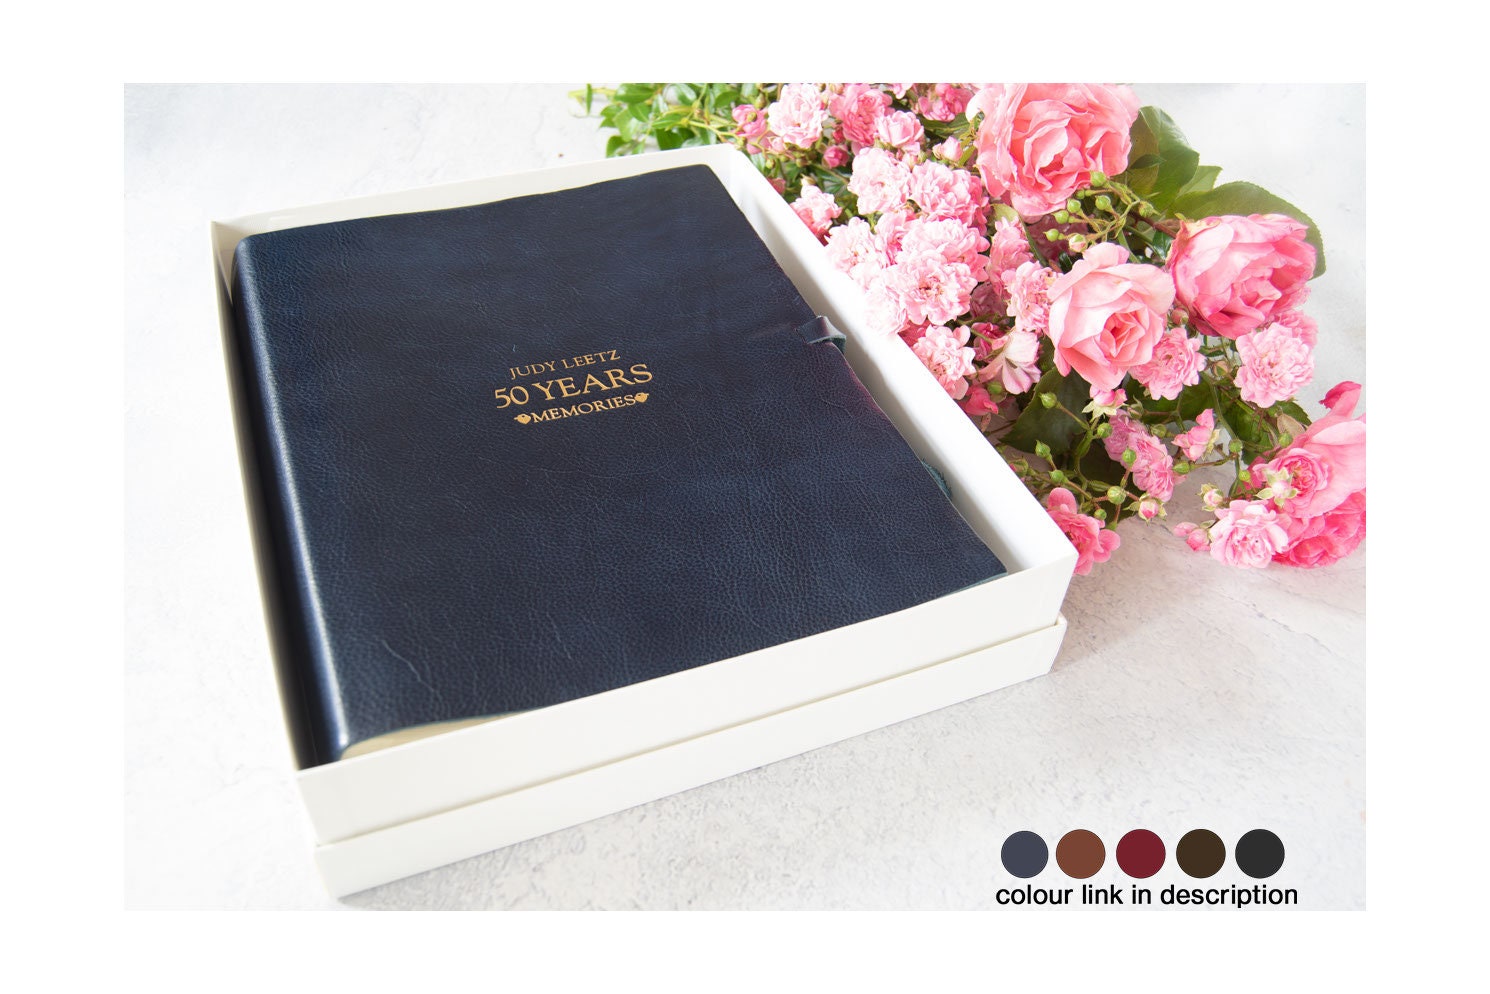 Accessories - Heirloom Leather Photo Album For the Ones I Love